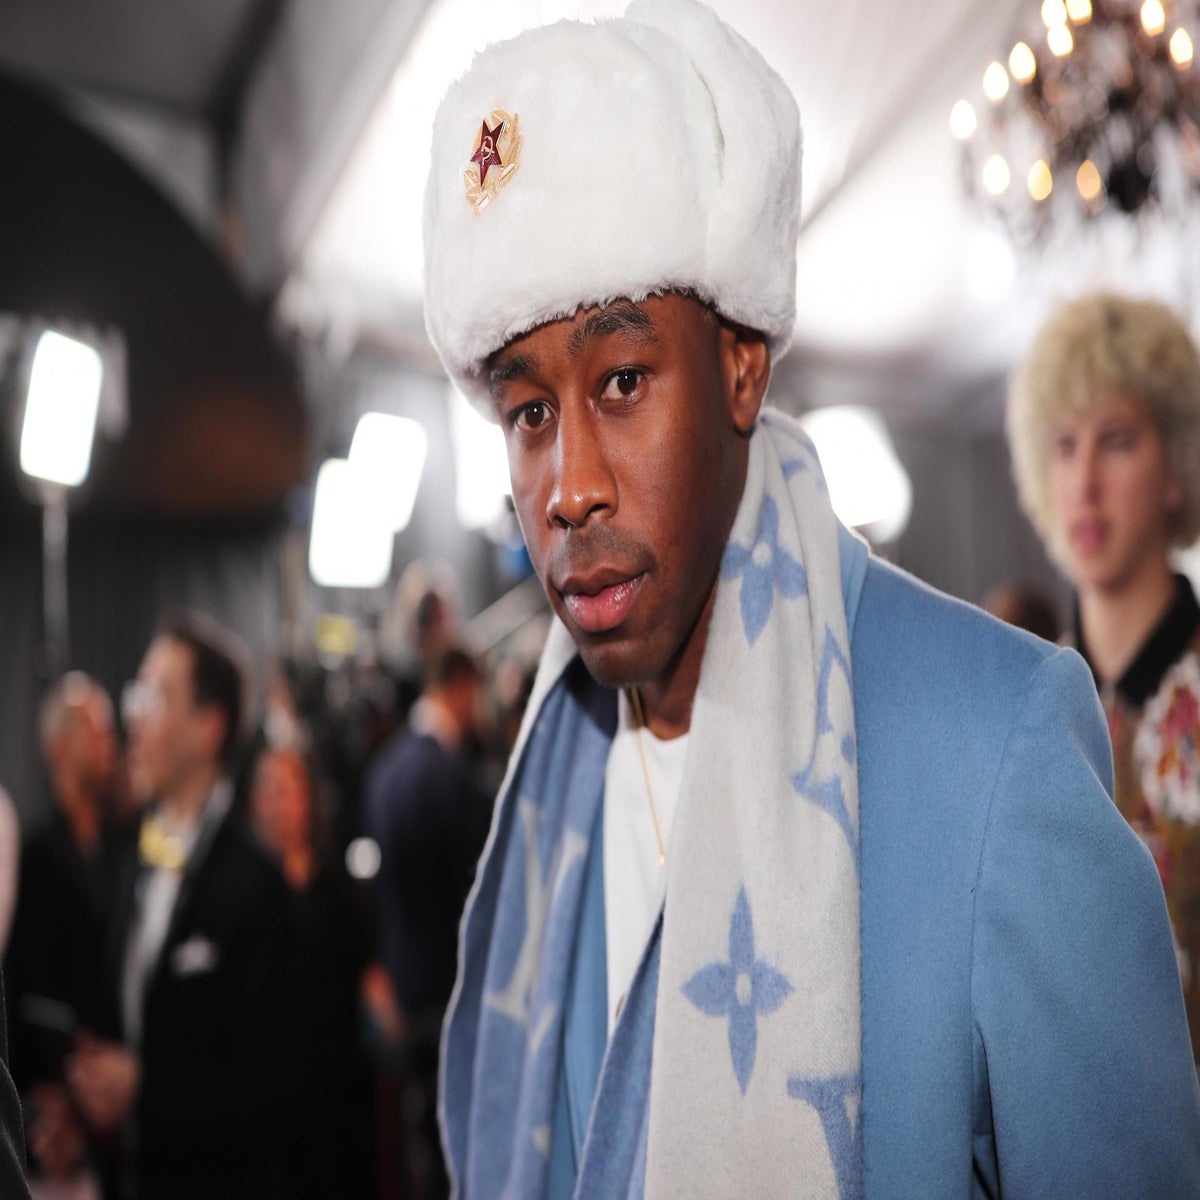 Tyler The Creator shows off his impressive bike skills as he rides